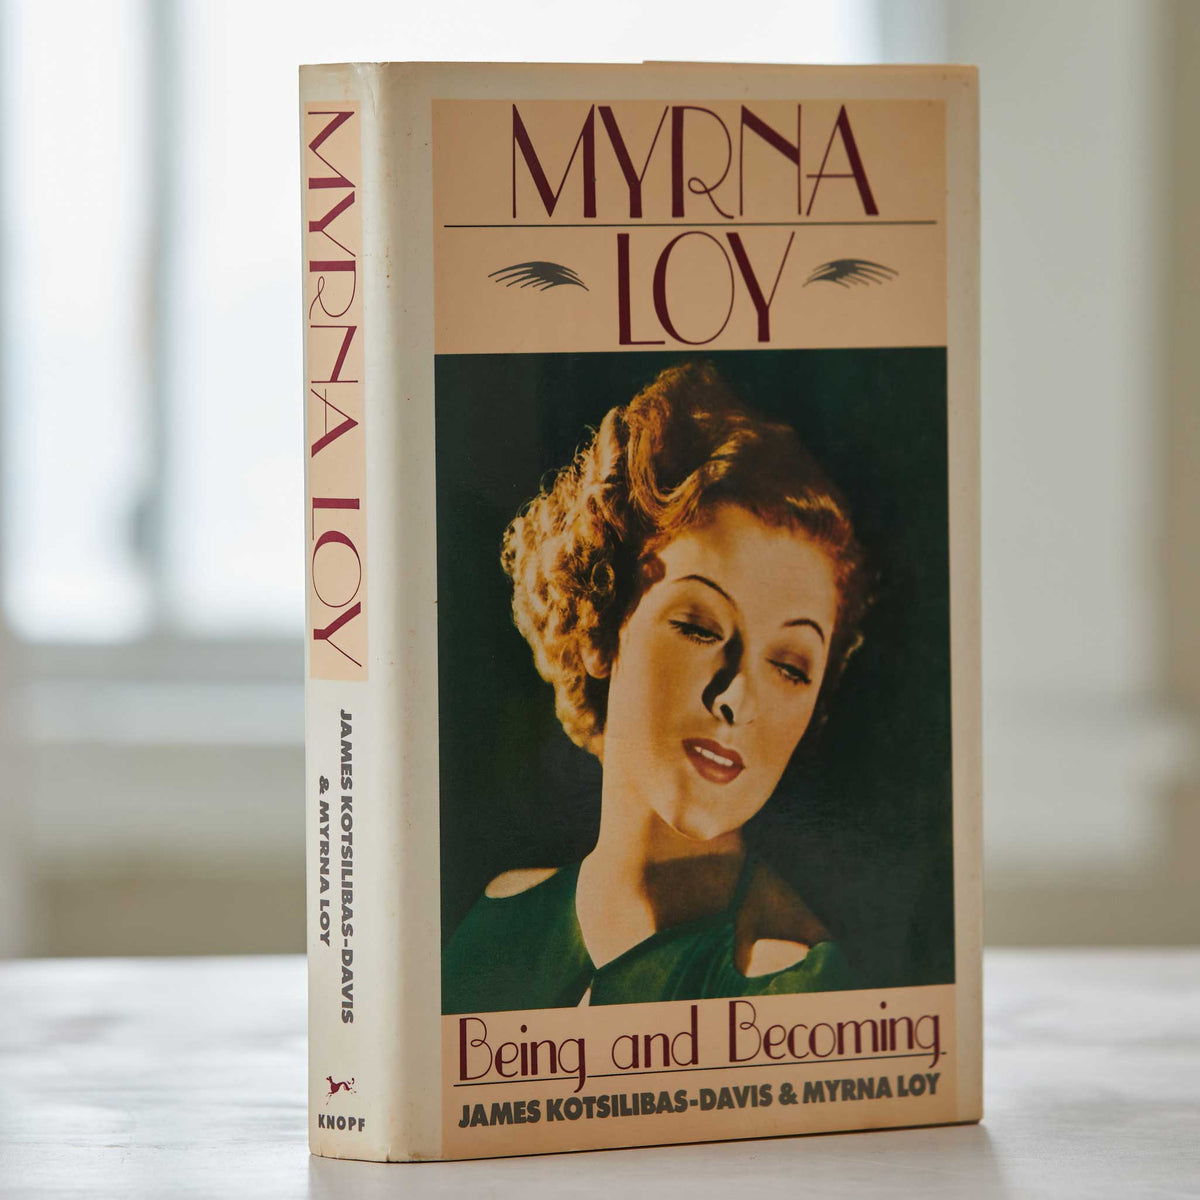 MYRNA LOY, BEING AND BECOMING